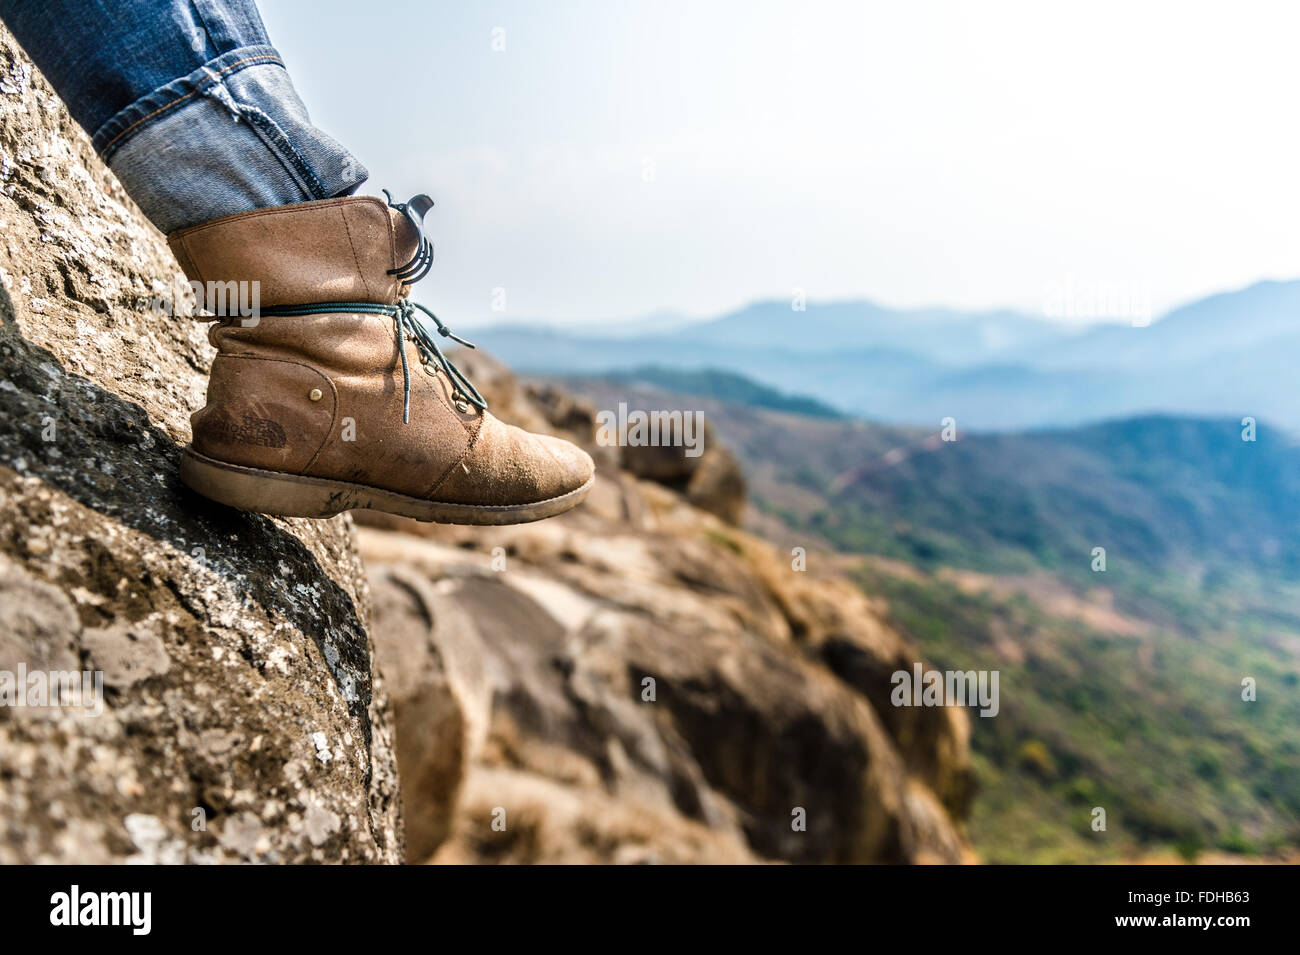 A person's boot hanging over a boulder in the Mlilwane Wildlife Sanctuary in Swaziland, Africa. Stock Photo